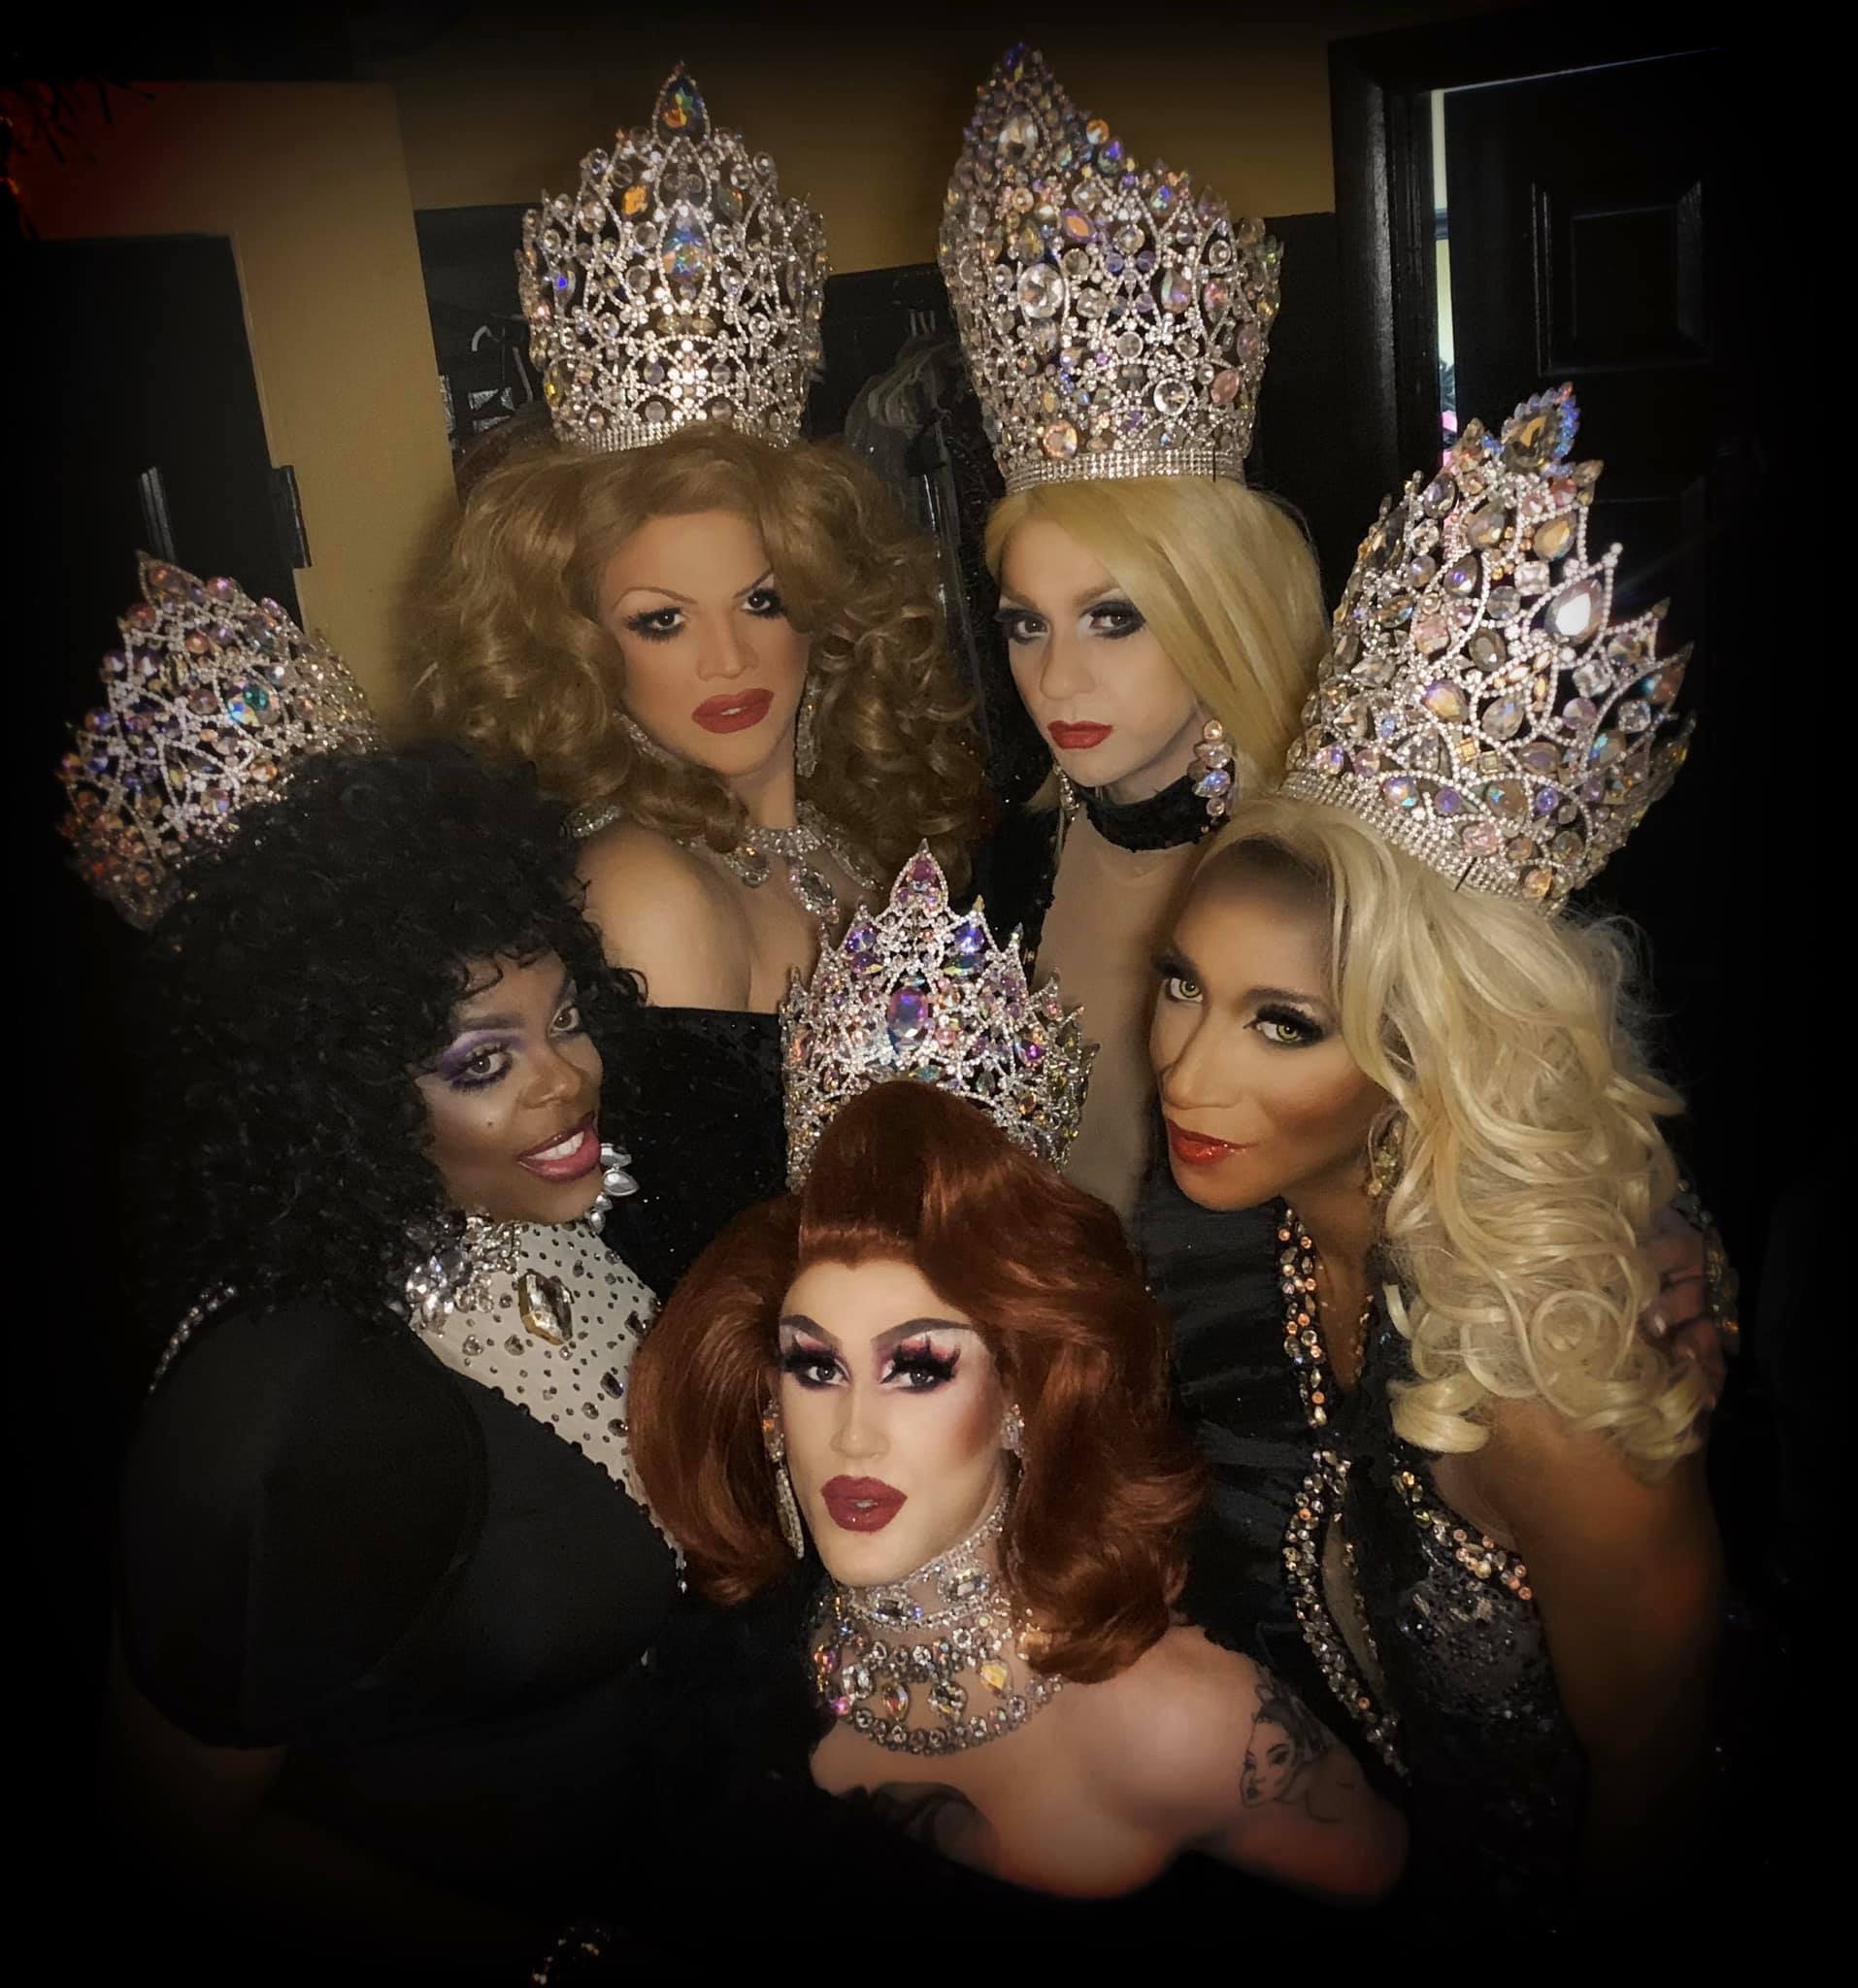 Back: Ava Aurora Foxx and Britney Blaire / Front: Mikayla Denise, Soy Queen and Nadia Nyce | Southbend Tavern (Columbus, Ohio) | 1/25/2020